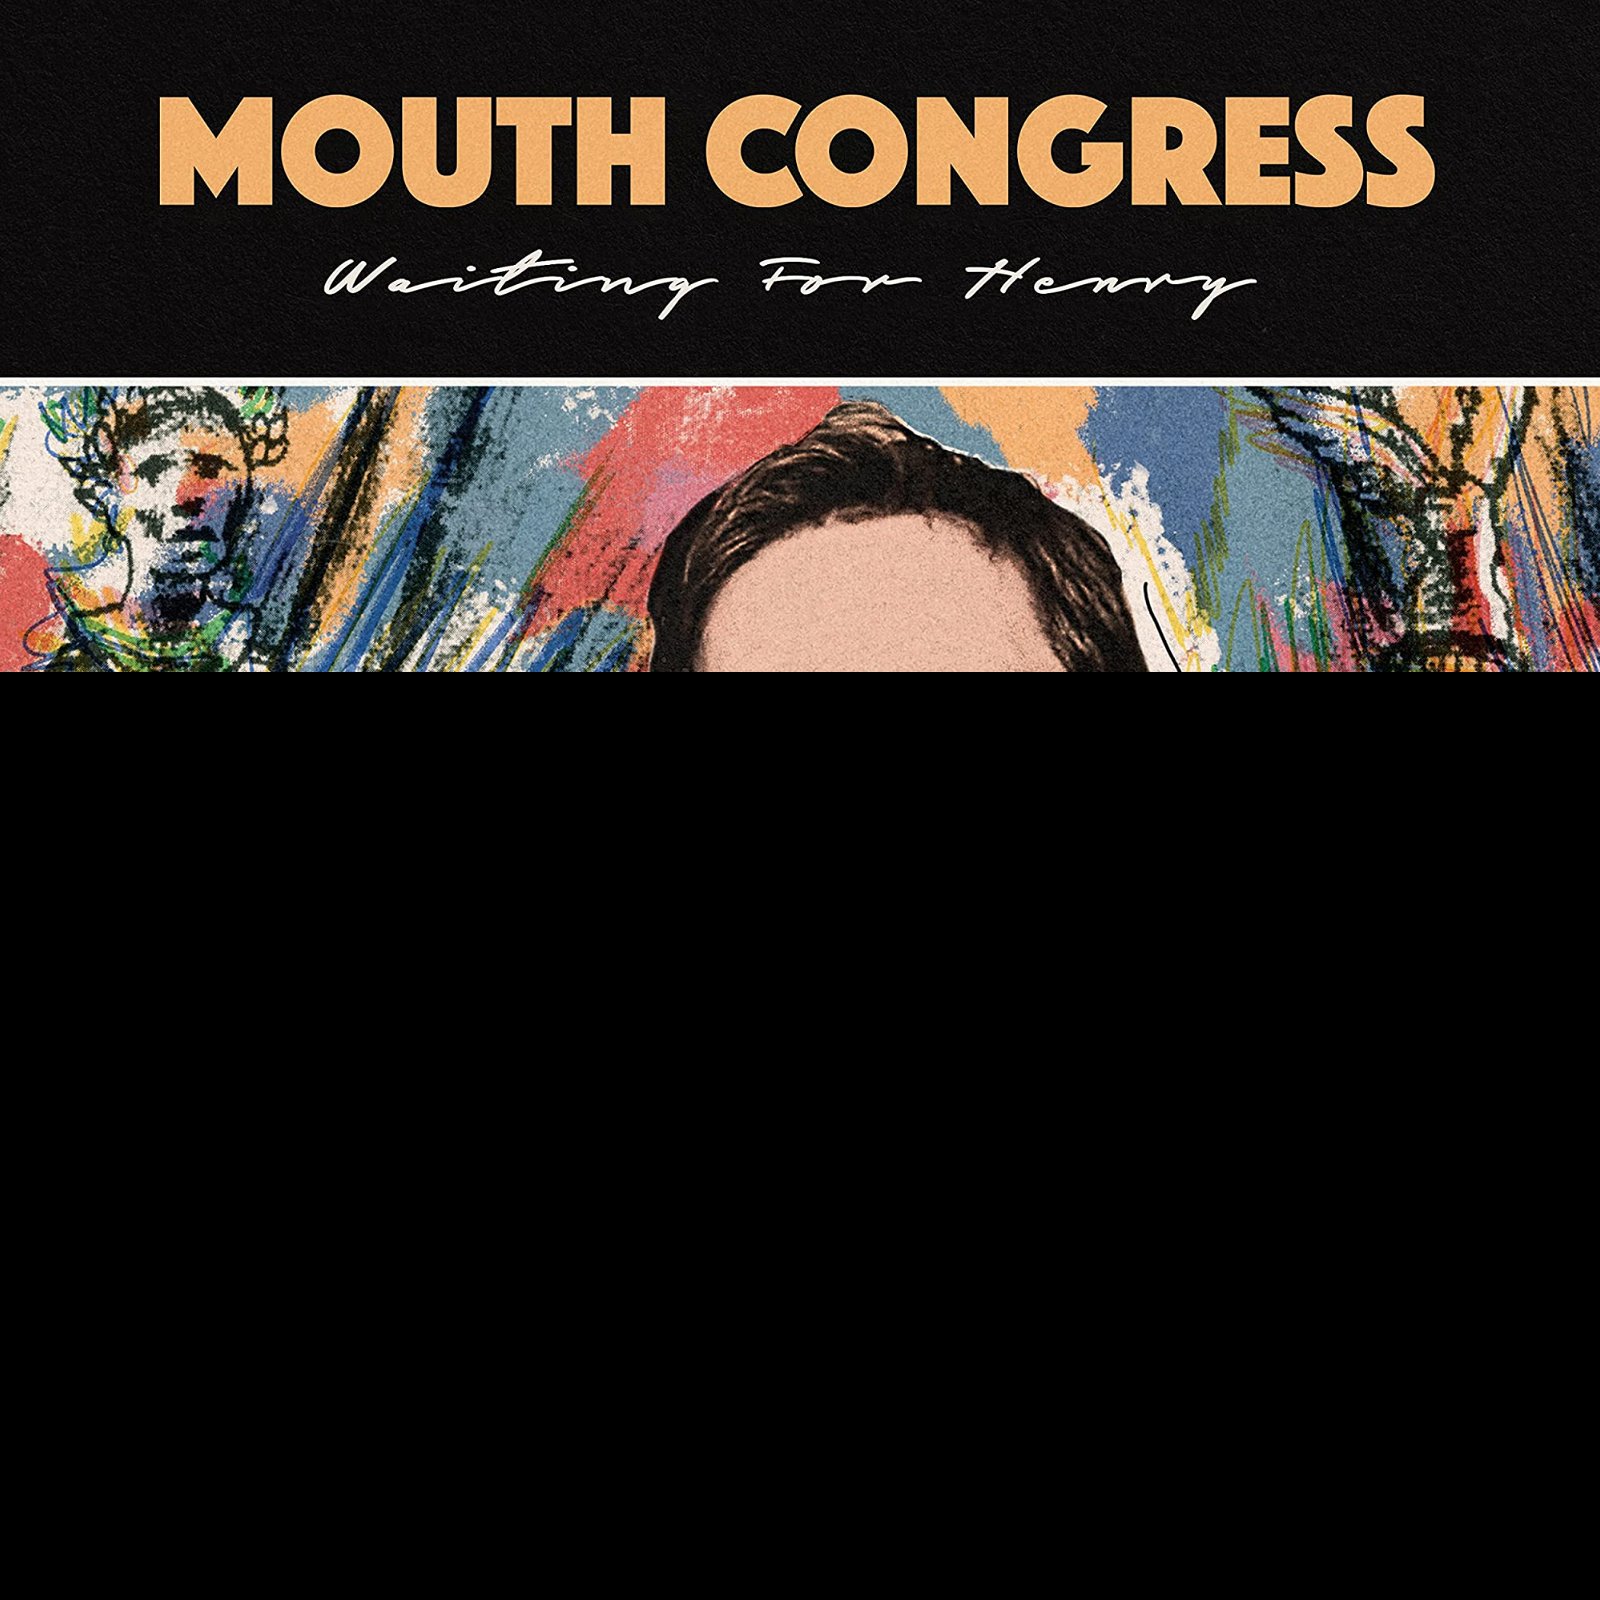 CD Shop - MOUTH CONGRESS WAITING FOR HENRY